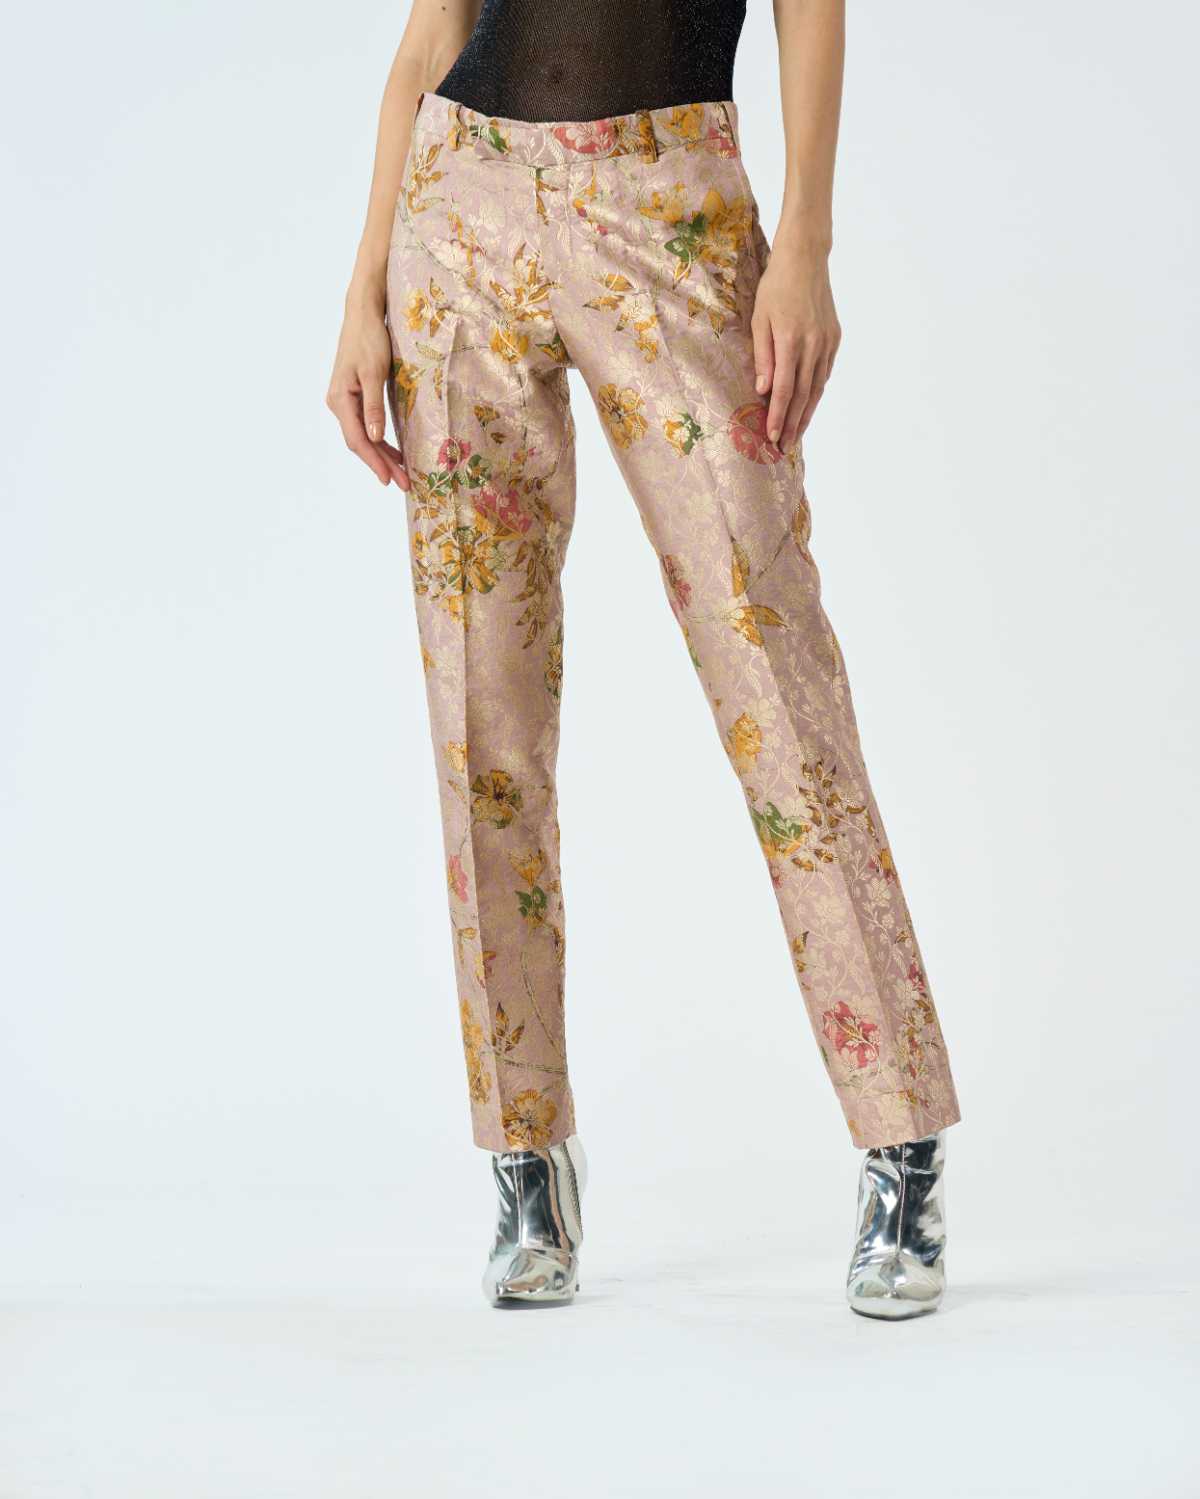 Classic Trousers Silk Brocade Champagne Pink